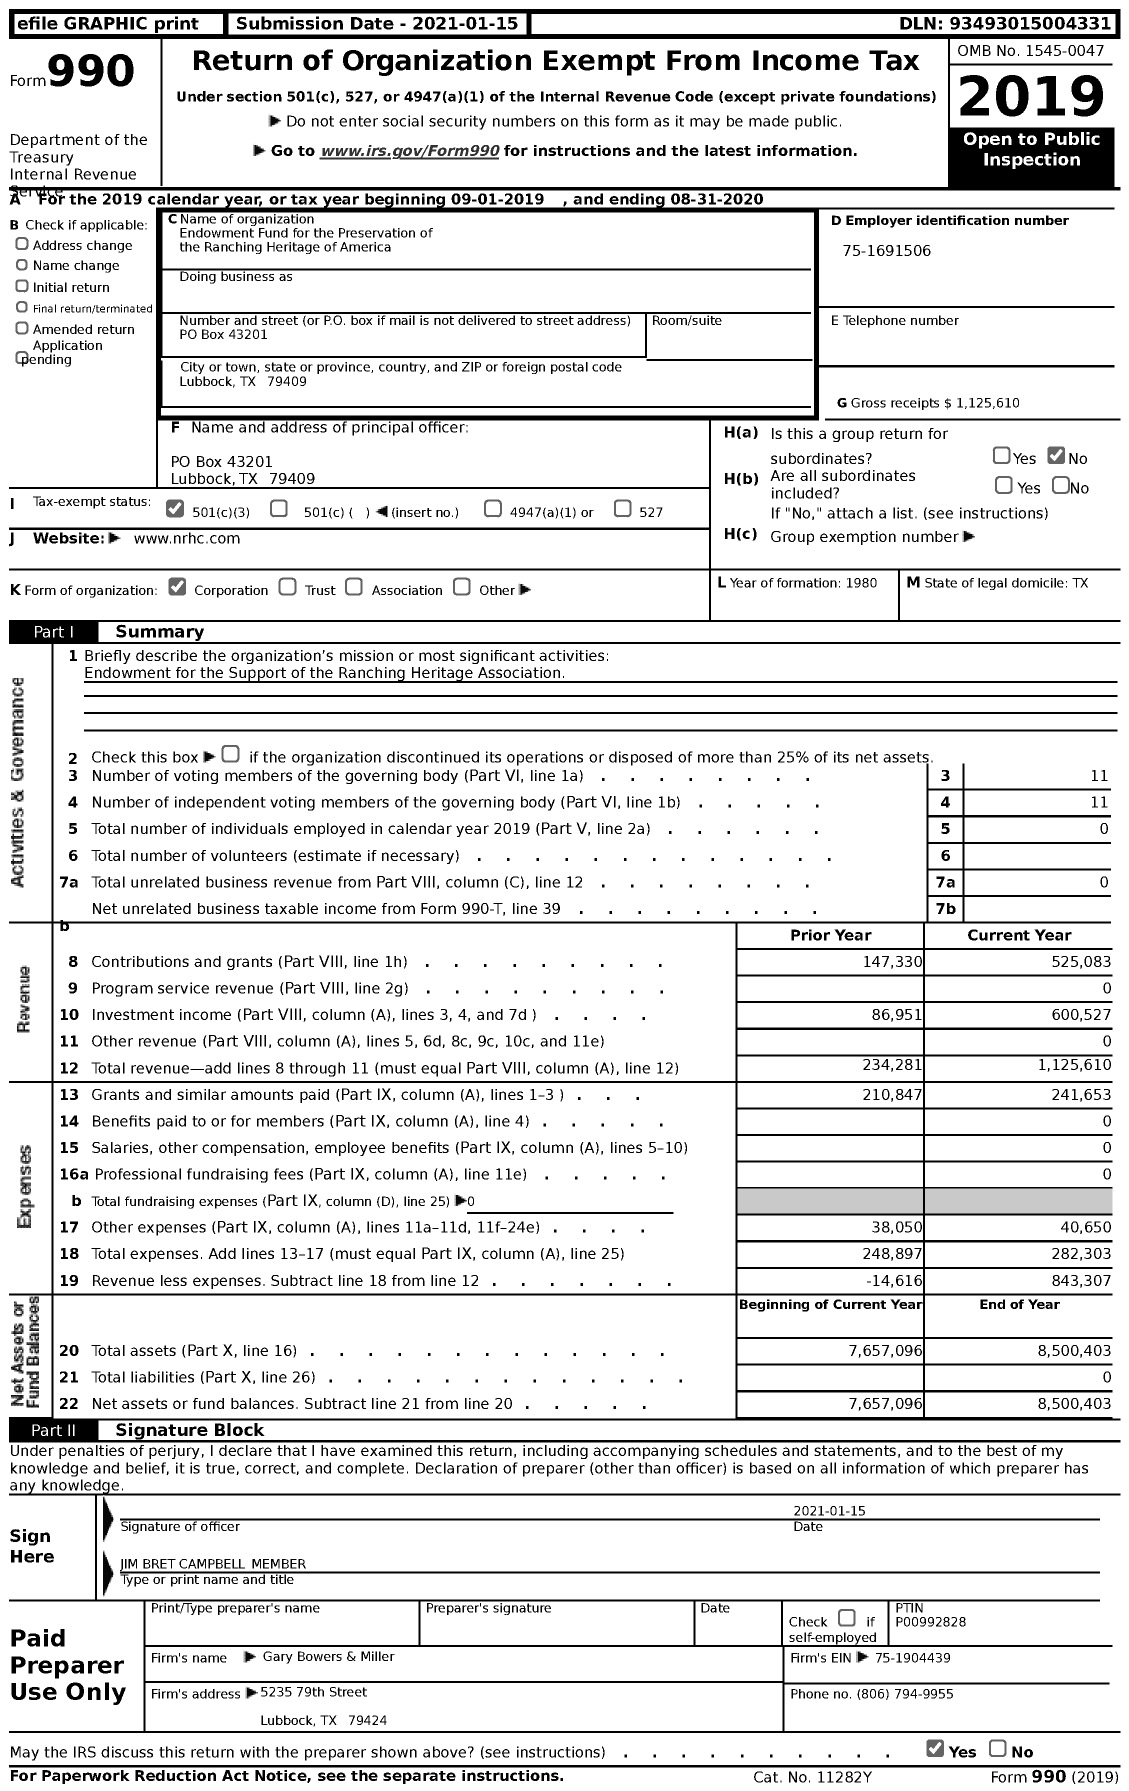 Image of first page of 2019 Form 990 for Endowment Fund for the Preservation of the Ranching Heritage of America